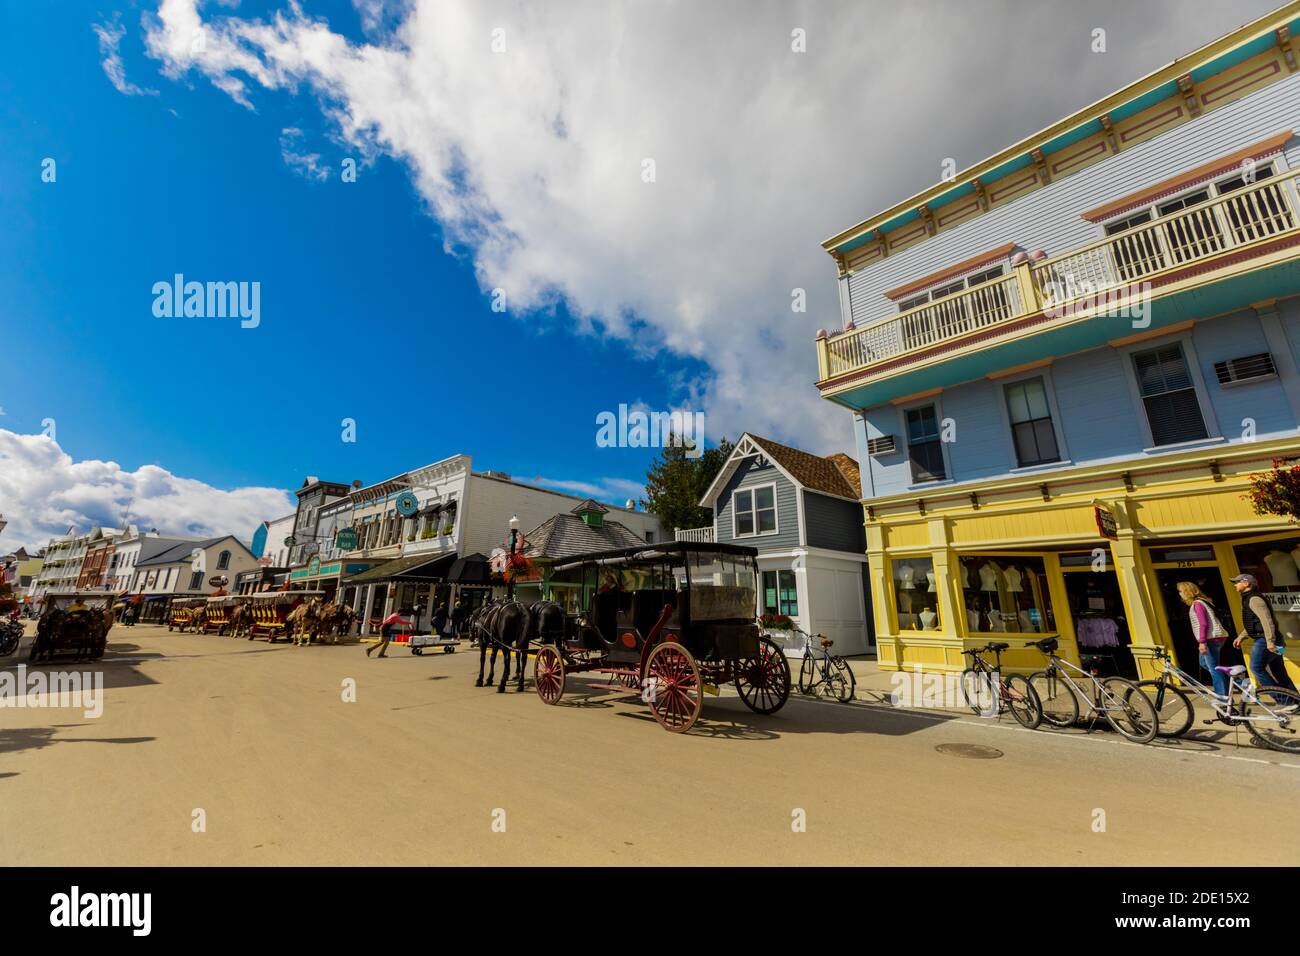 Horse and carriage filled streets lined with beautiful colorful buildings, Mackinac Island, Michigan, United States of America, North America Stock Photo